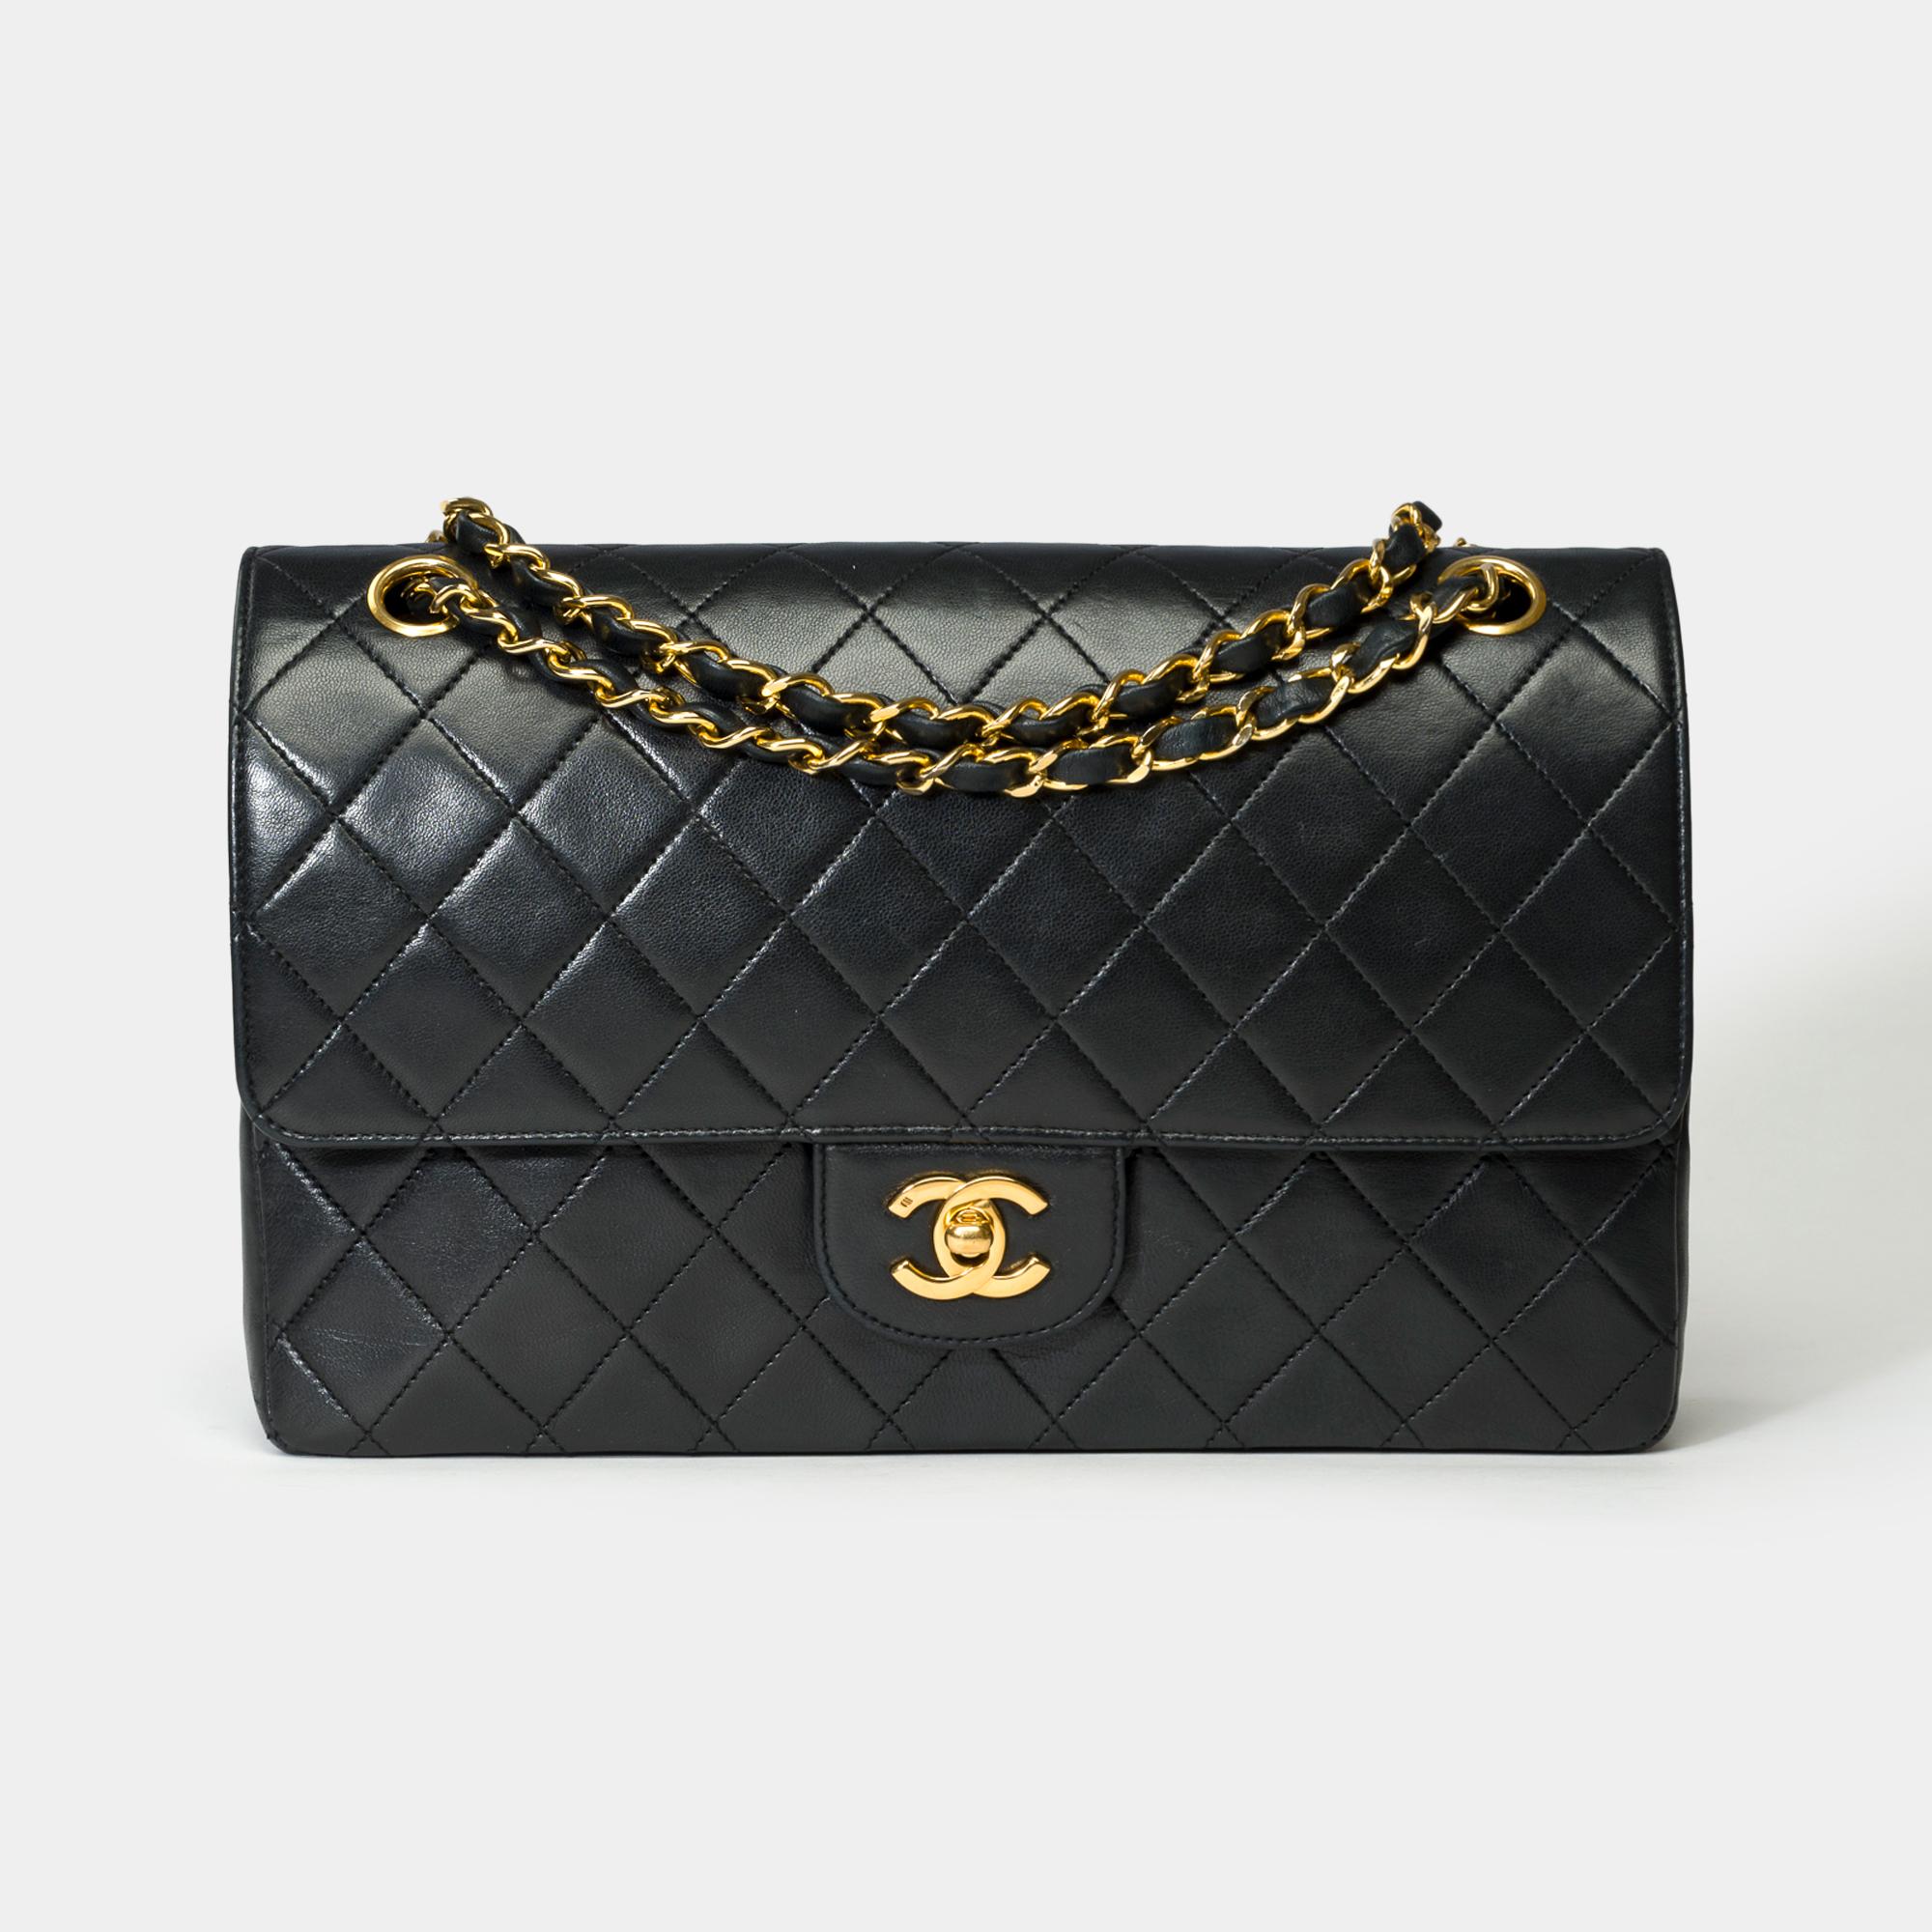 Superb​ ​Chanel​ ​Timeless/Classic​ ​double​ ​flap​ ​shoulder​ ​bag​ ​in​ ​black​ ​quilted​ ​lambskin,​ ​gold​ ​metal​ ​trim,​ ​a​ ​gold​ ​metal​ ​chain​ ​handle​ ​interlaced​ ​with​ ​black​ ​leather​ ​for​ ​a​ ​shoulder​ ​or​ ​crossbody​